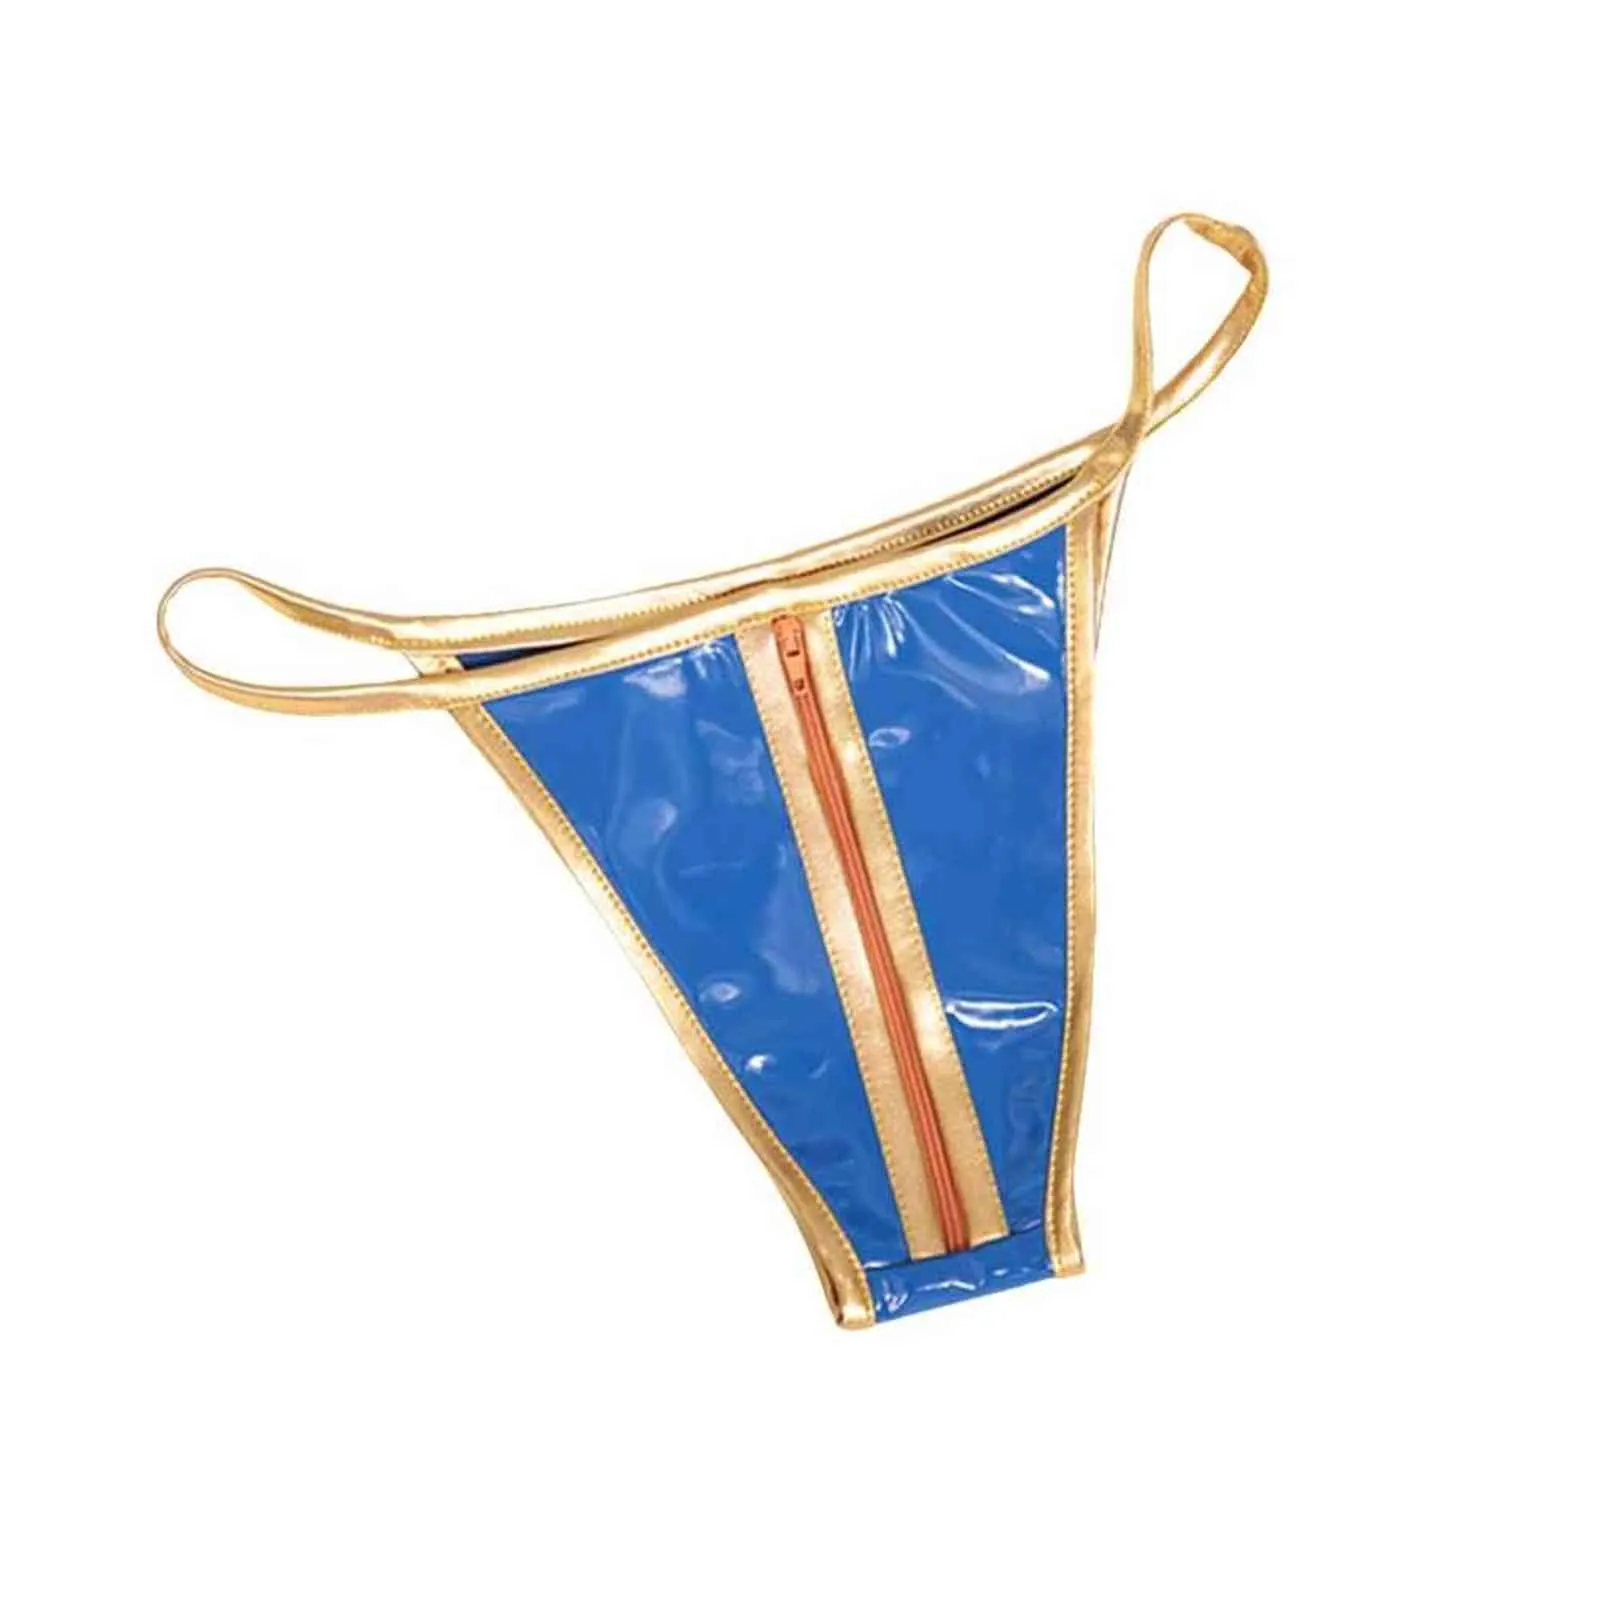 Golden Edge PVC Faux Leather Strip Panty With Open Front Crotch And Zipper  Sexy Lingerie For Women From Gspot, $12.8